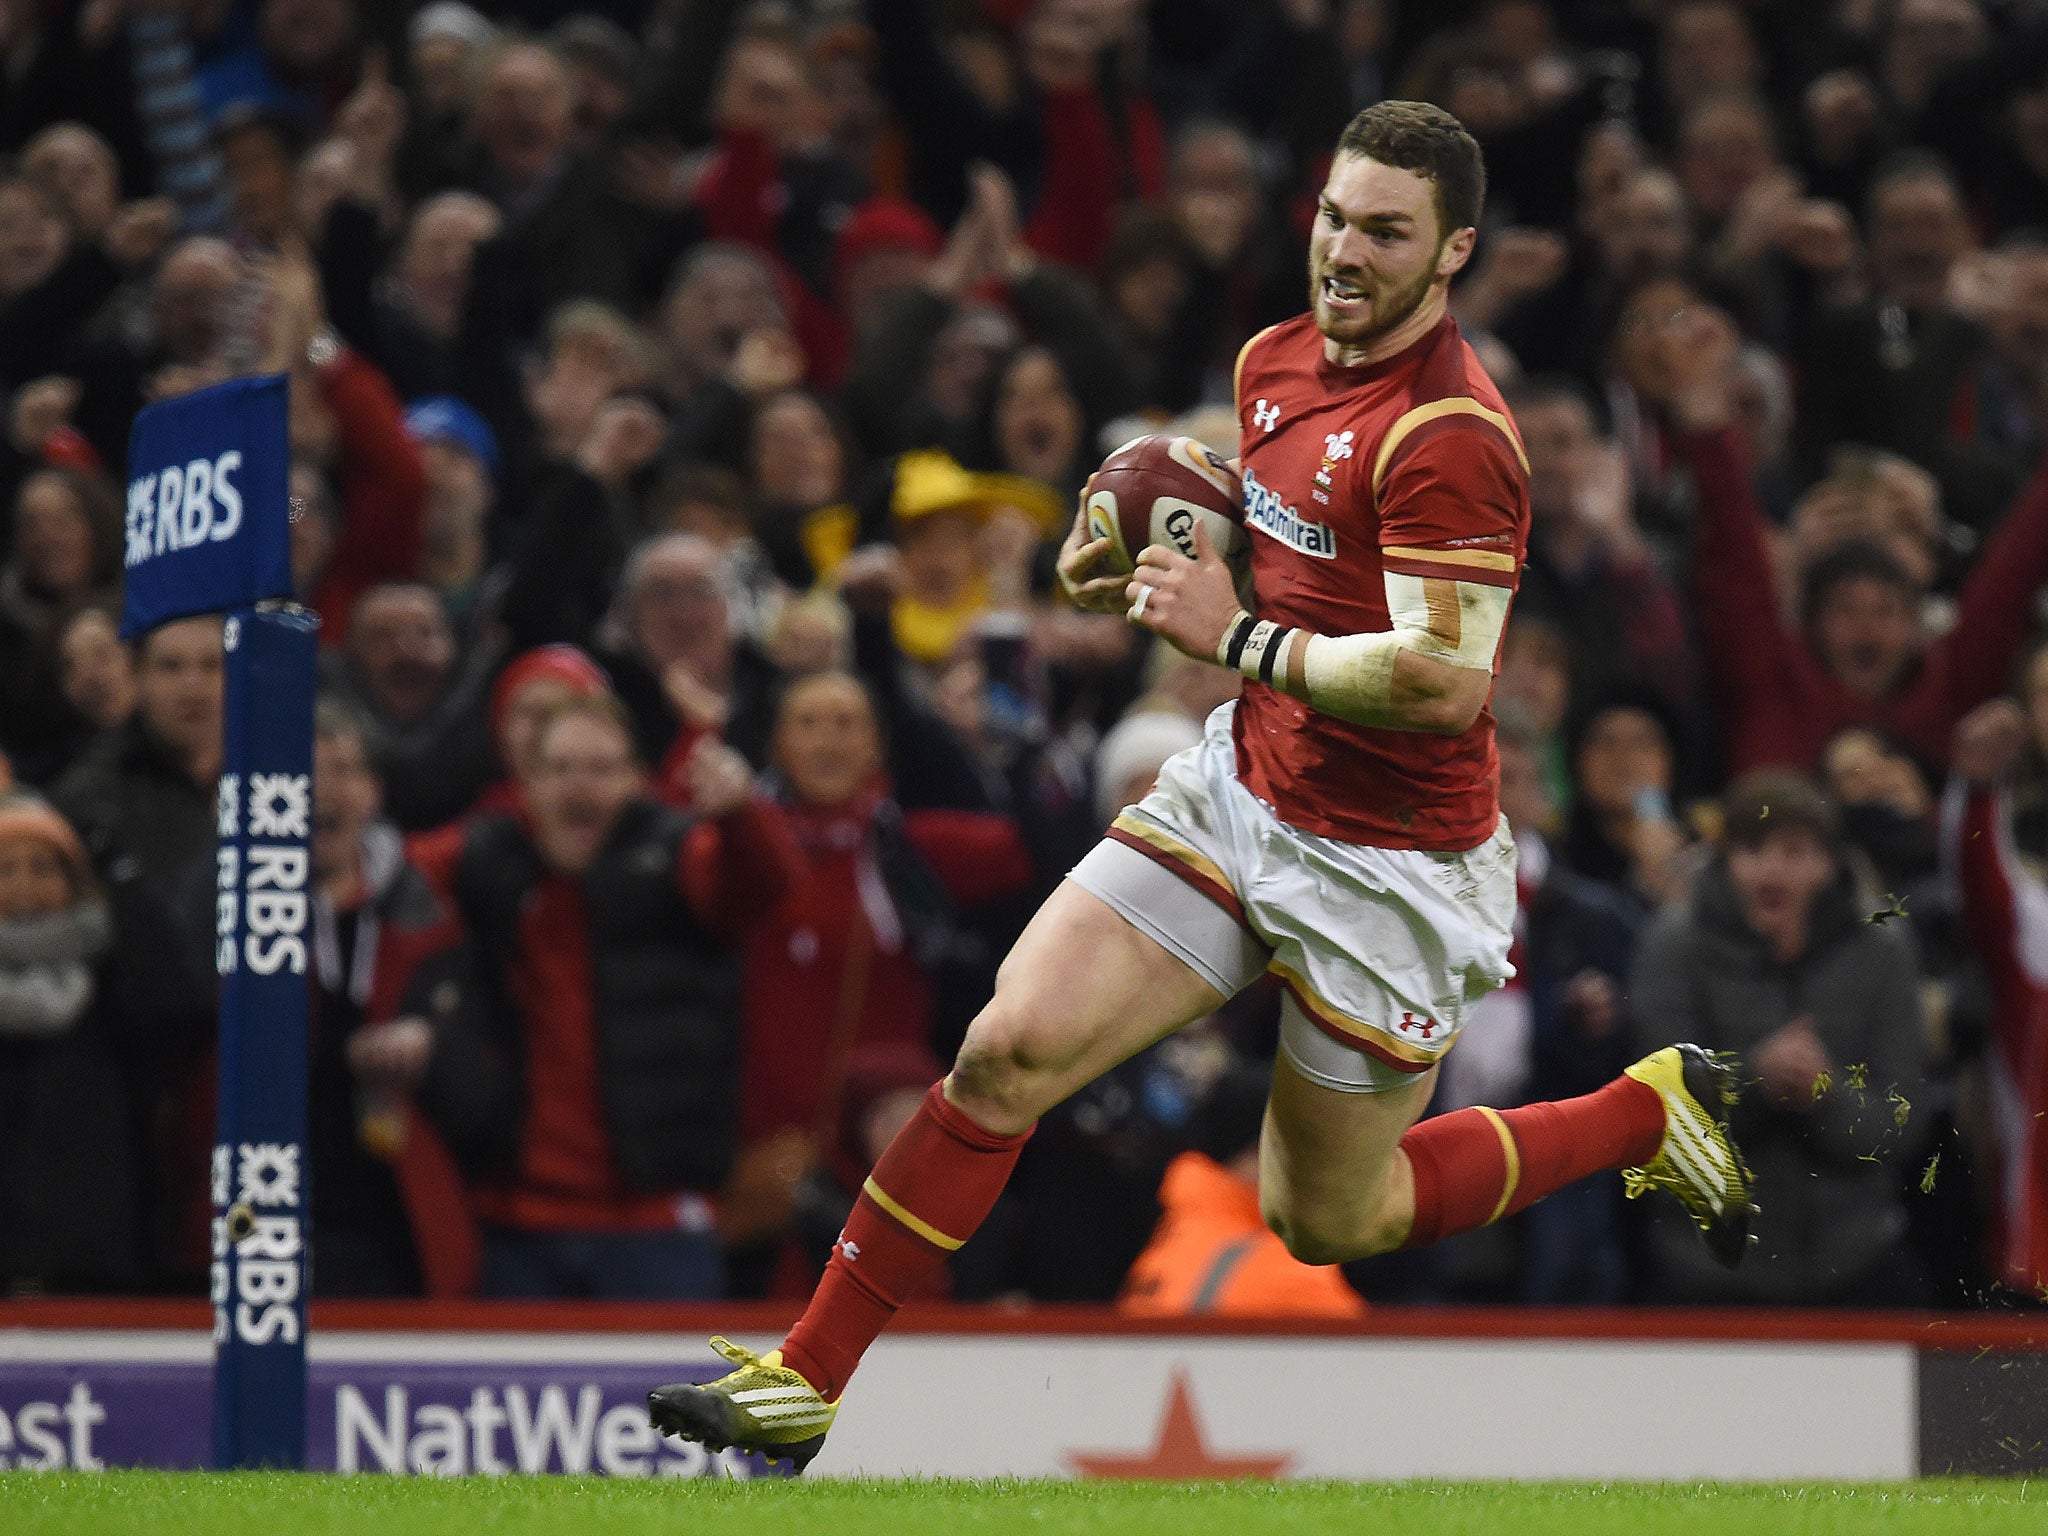 George North scores the match-winning try for Wales against Scotland